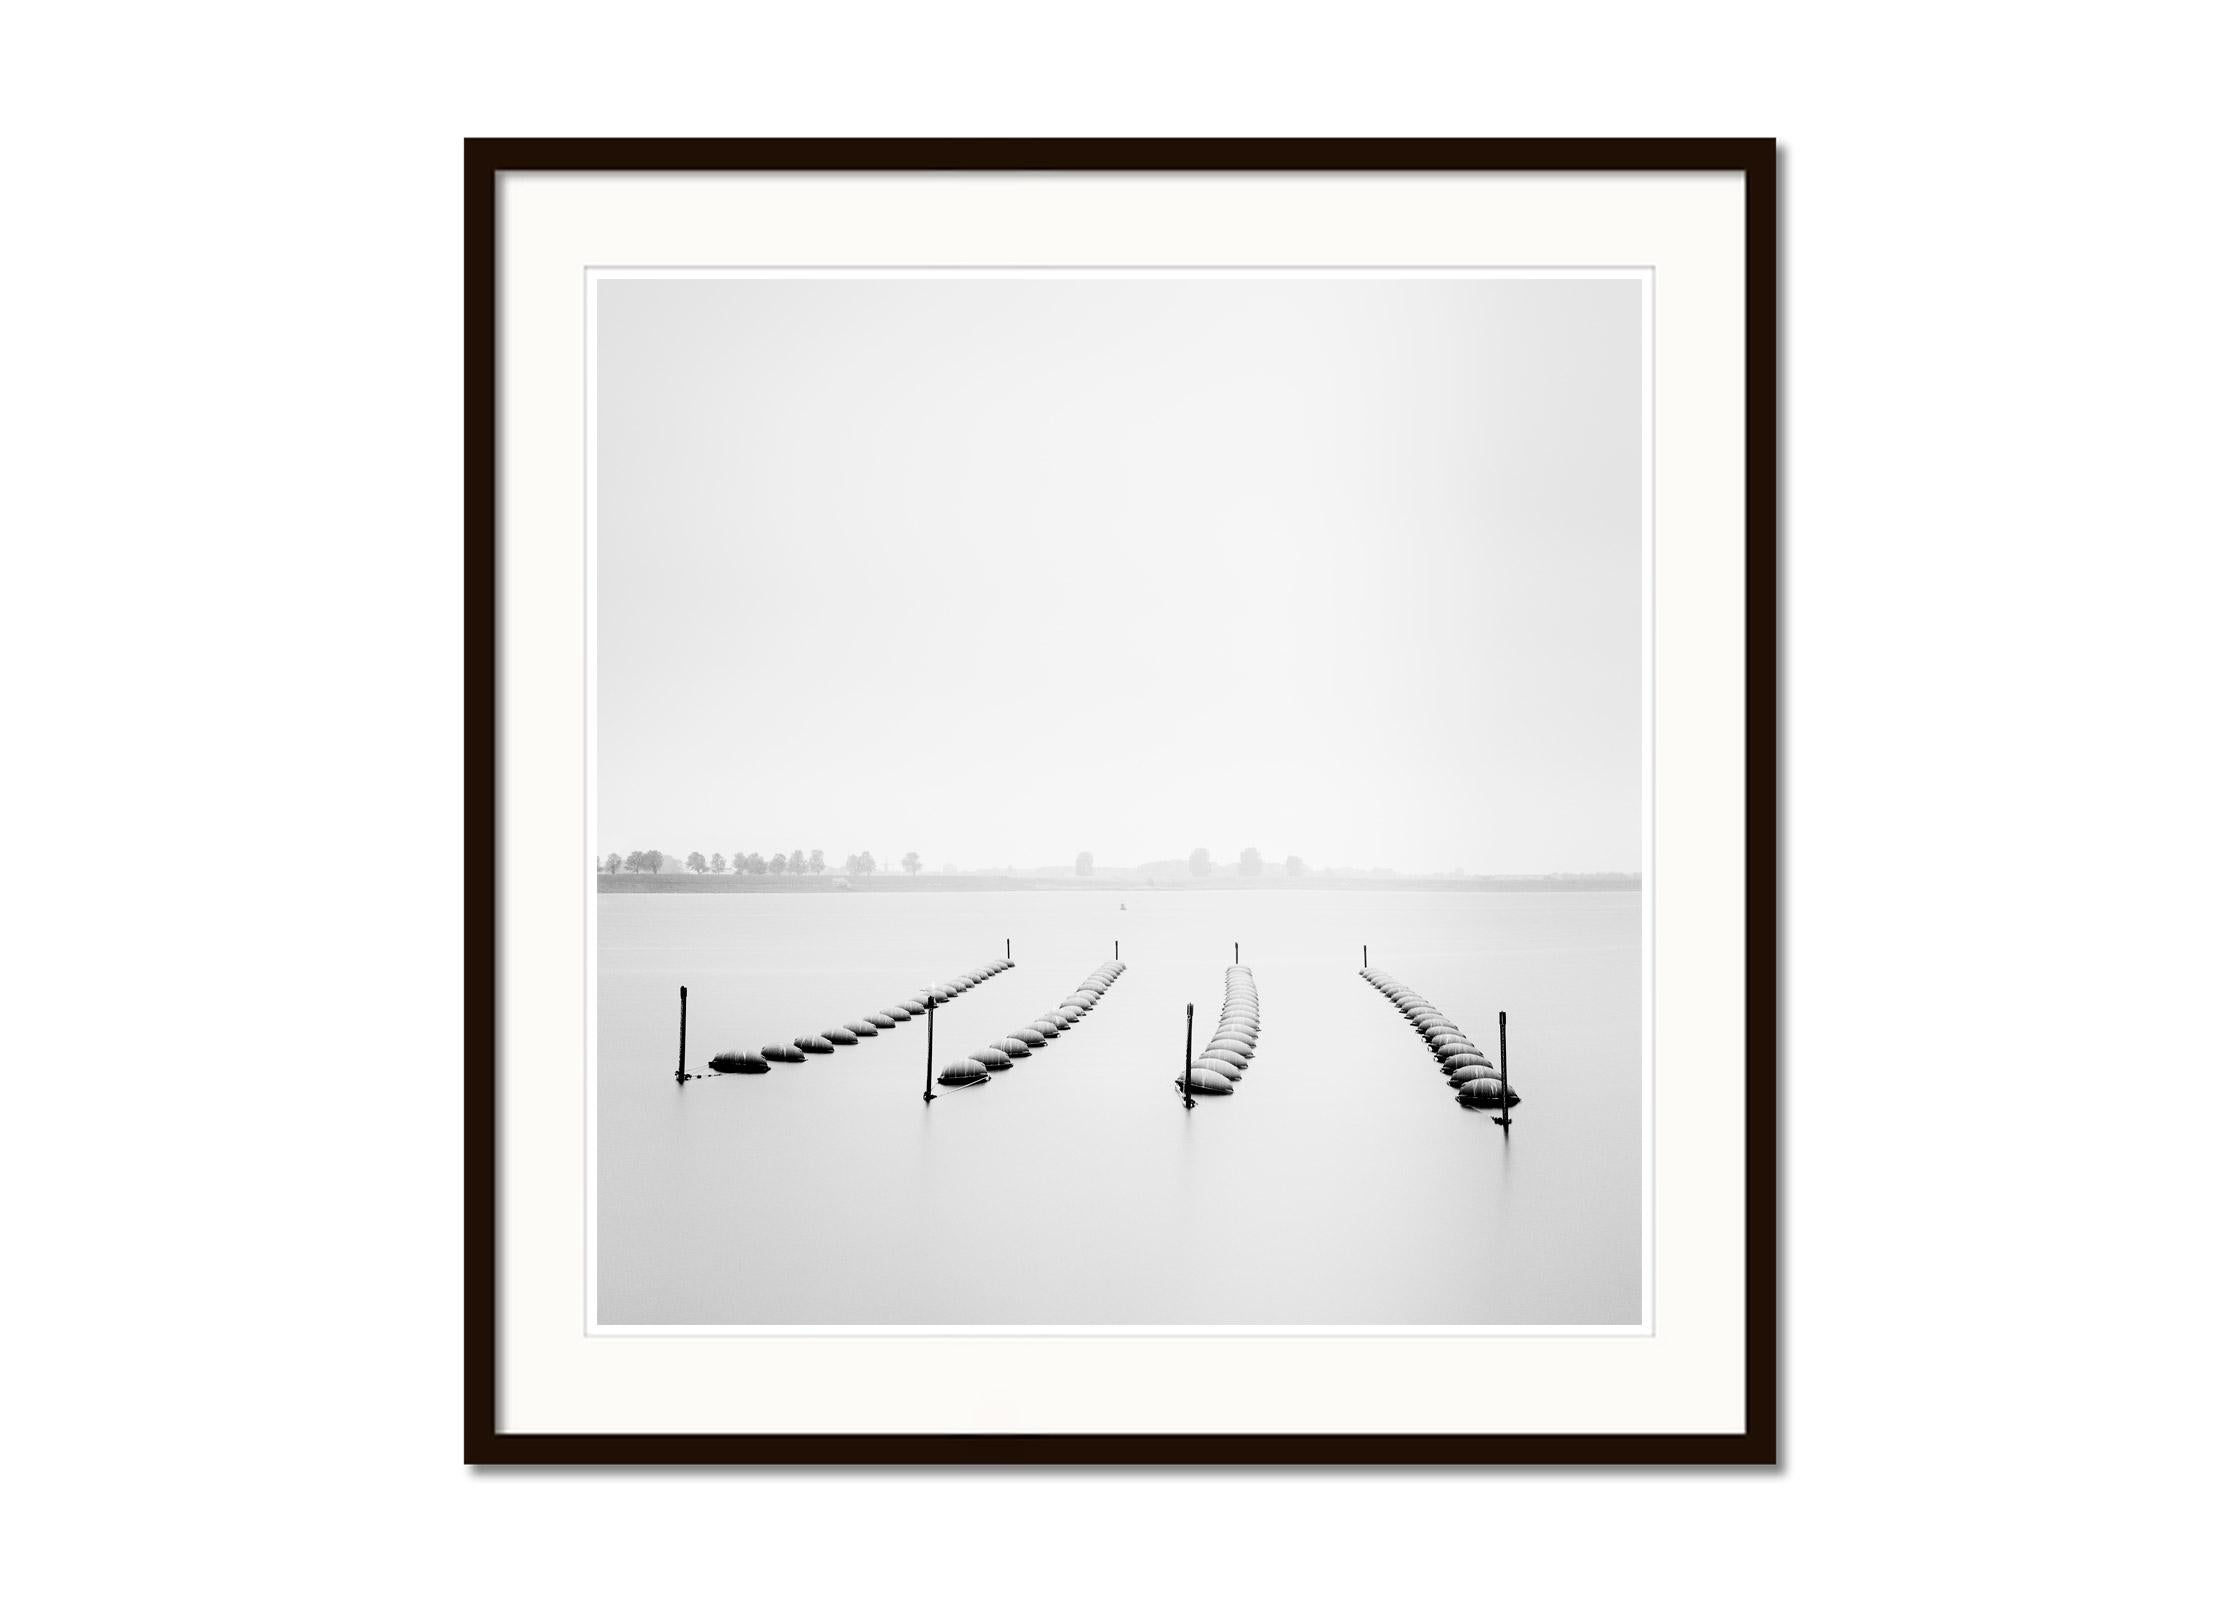 Black and white fine art long exposure waterscape - landscape photography print. Archival pigment ink print, edition of 9. Signed, titled, dated and numbered by artist. Certificate of authenticity included. Printed with 4cm white